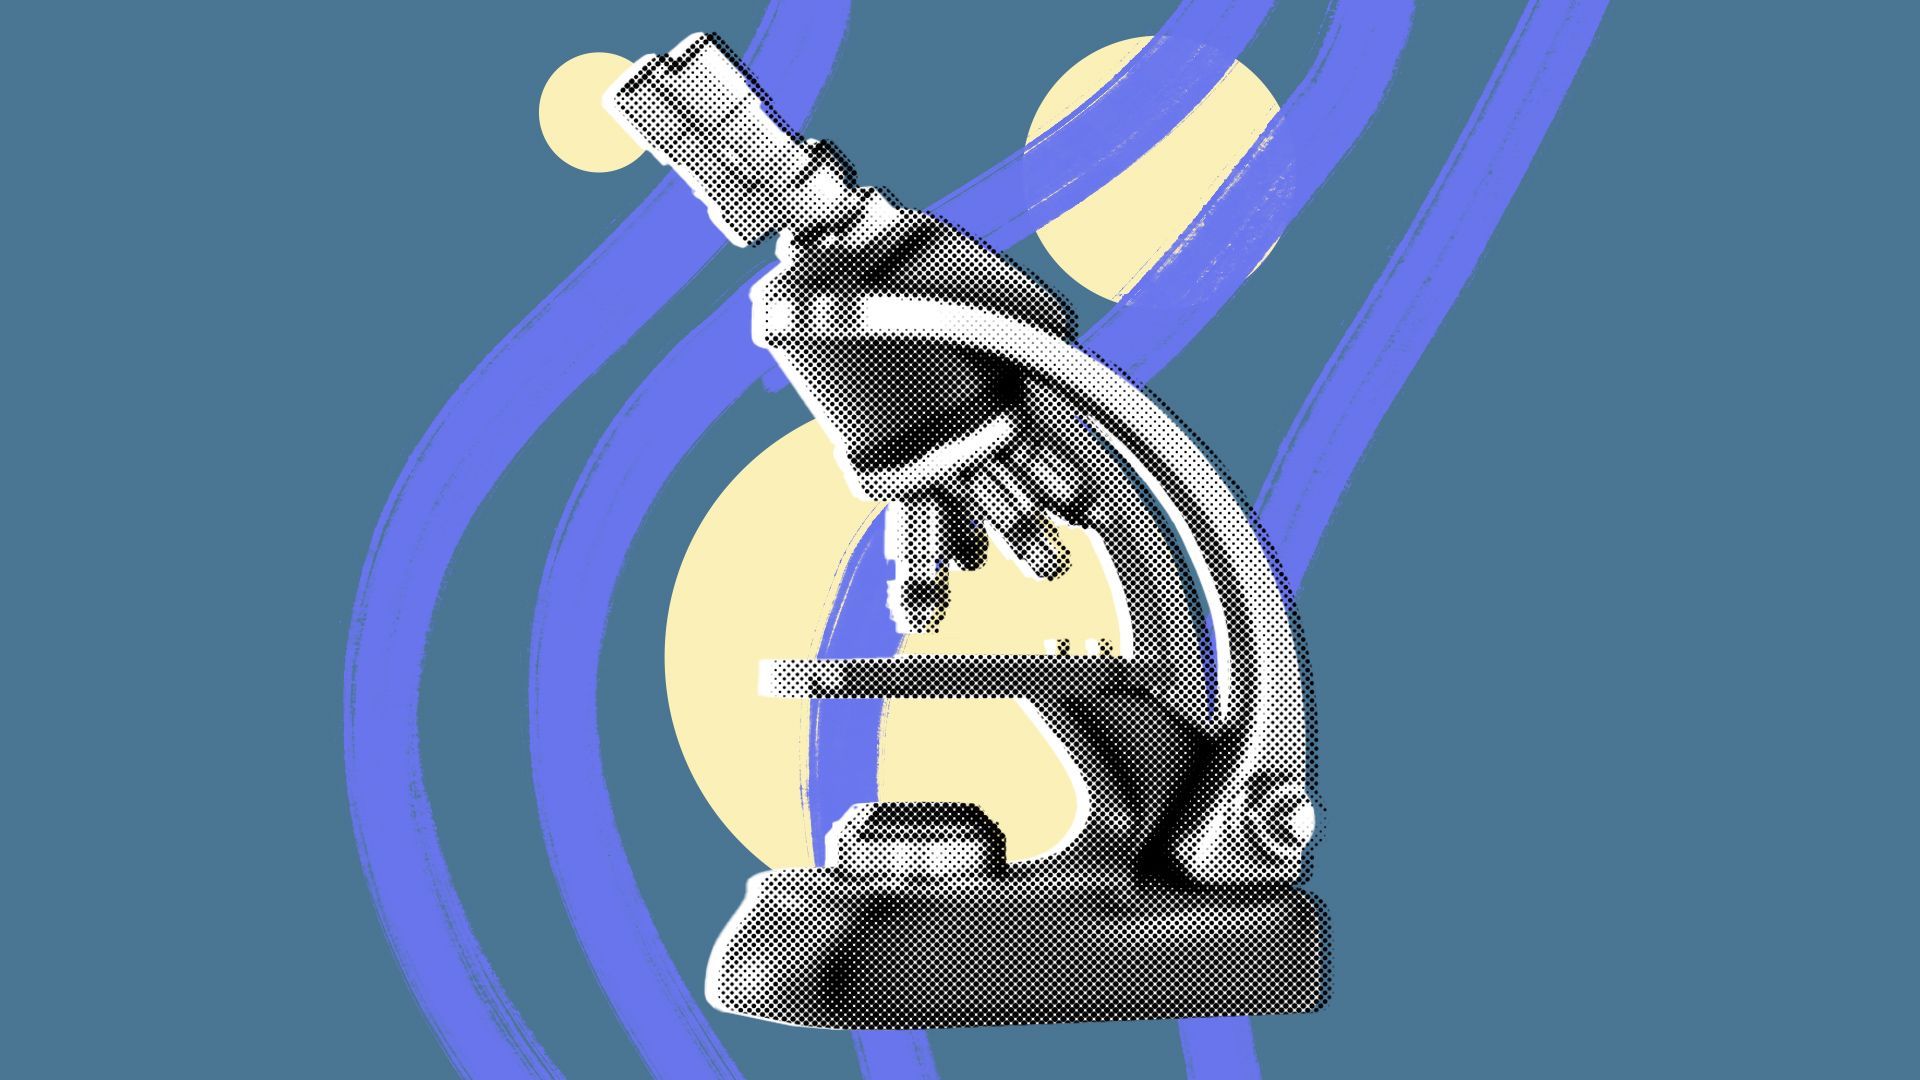 Illustration of a microscope on top of swirling lines and circles.